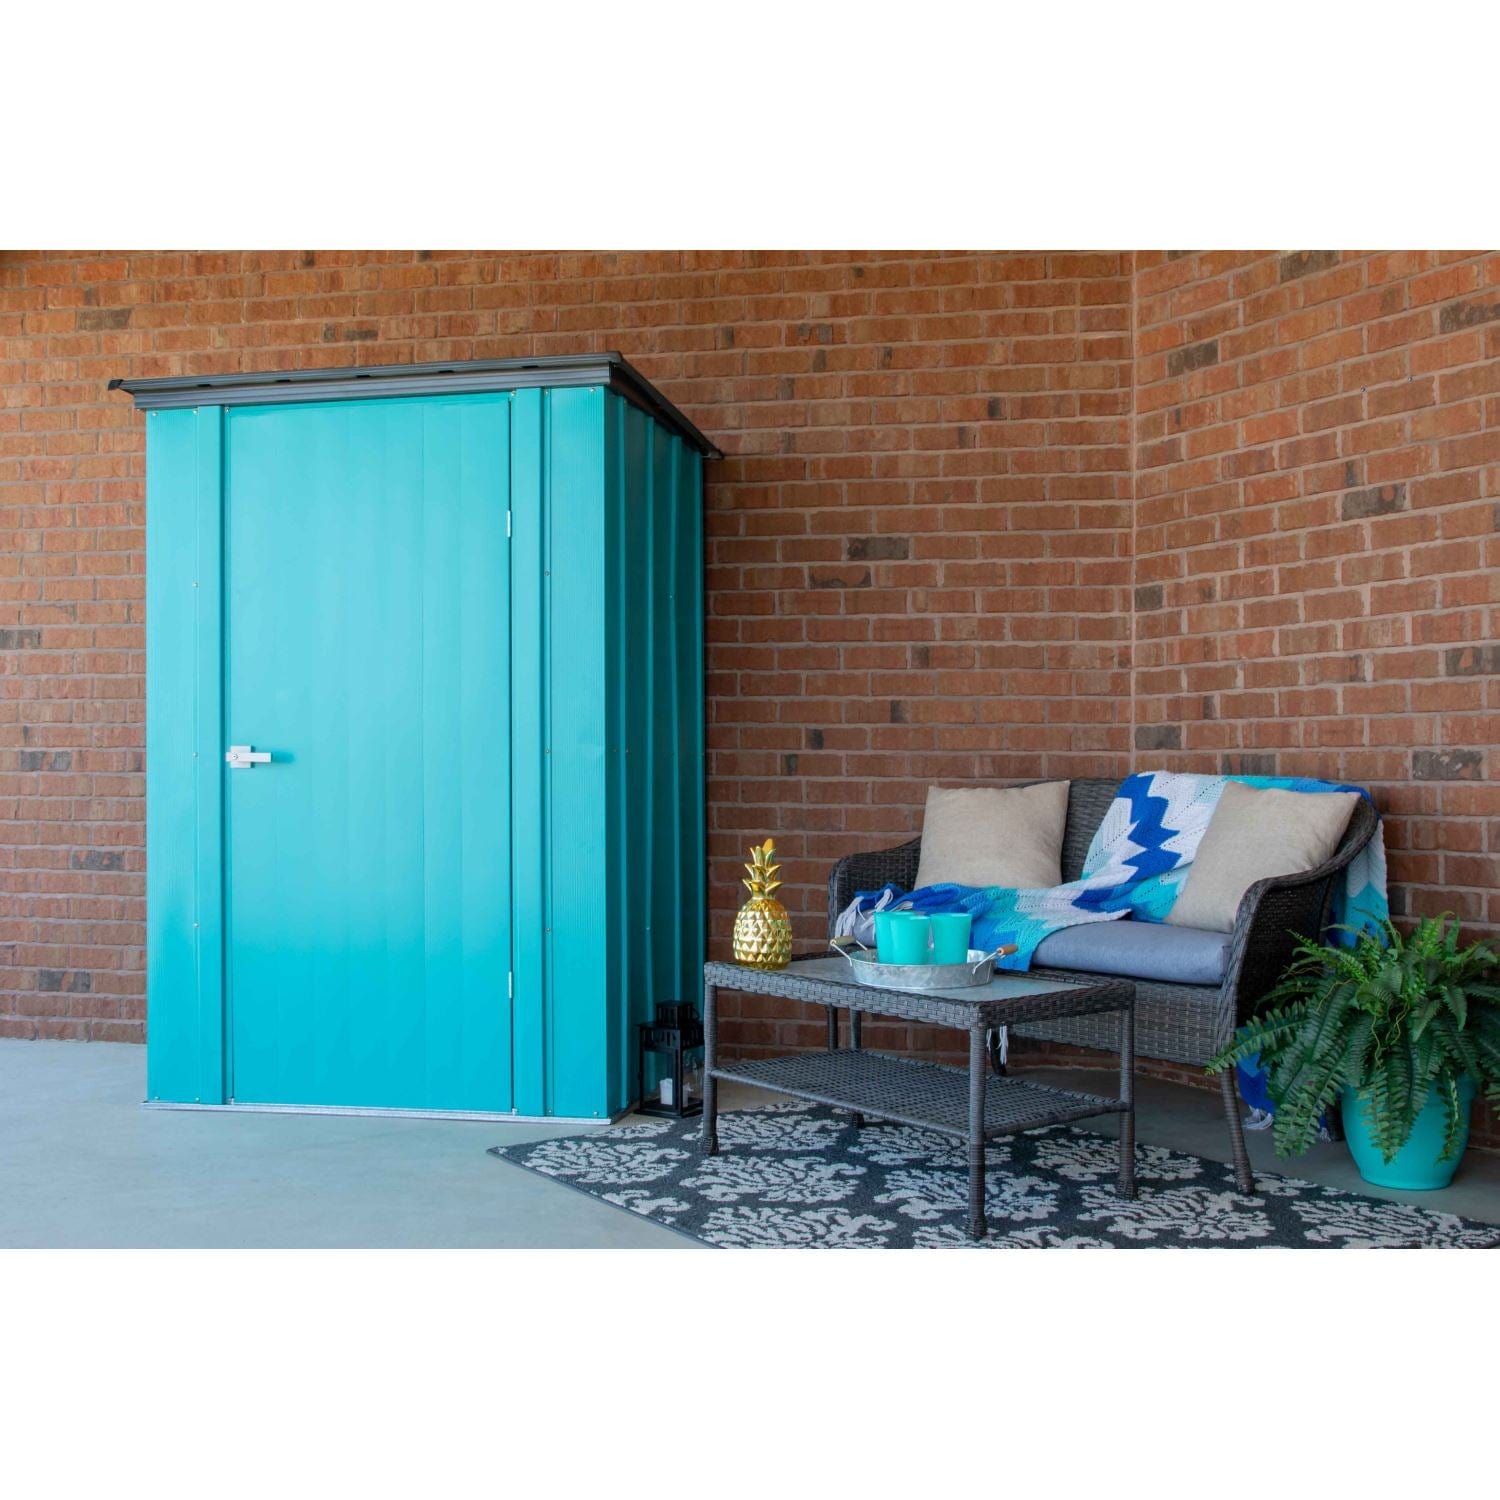 Spacemaker Metal Storage Shed Kit Spacemaker | Patio Shed, 4' x 3' x 6' - Teal and Anthracite CY43T21